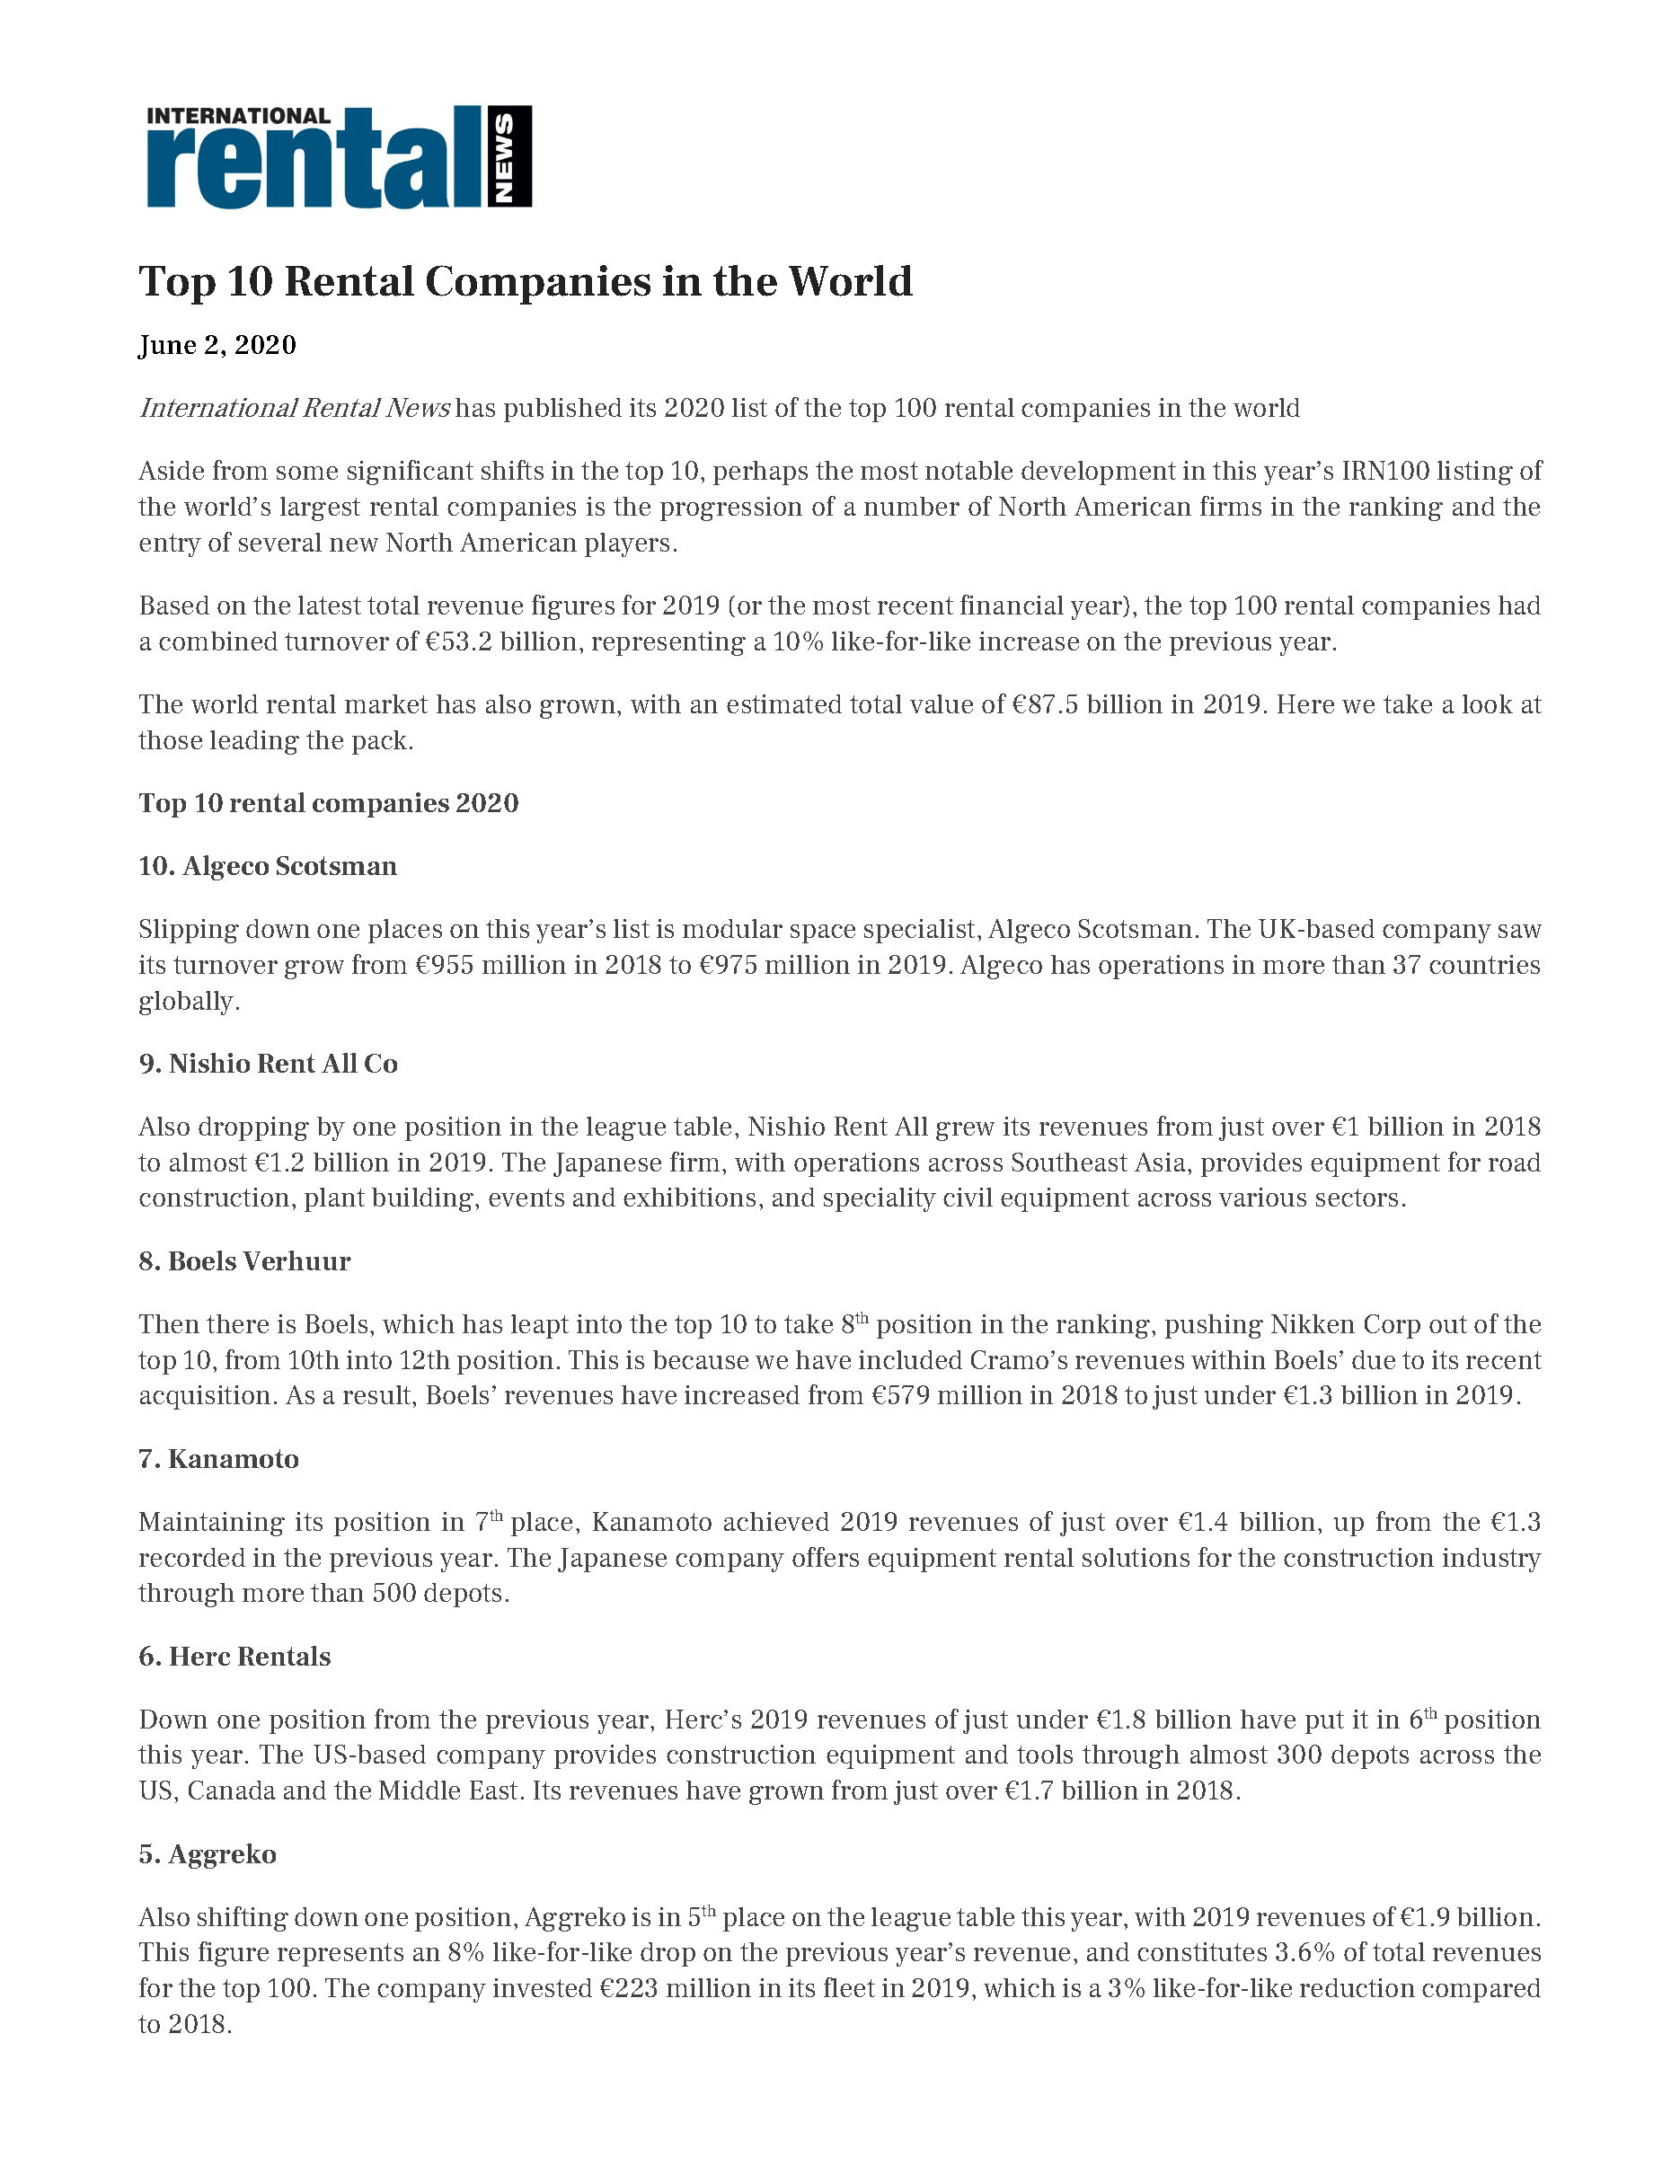 Pages from Top 10 Rental Companies in the World June 2020